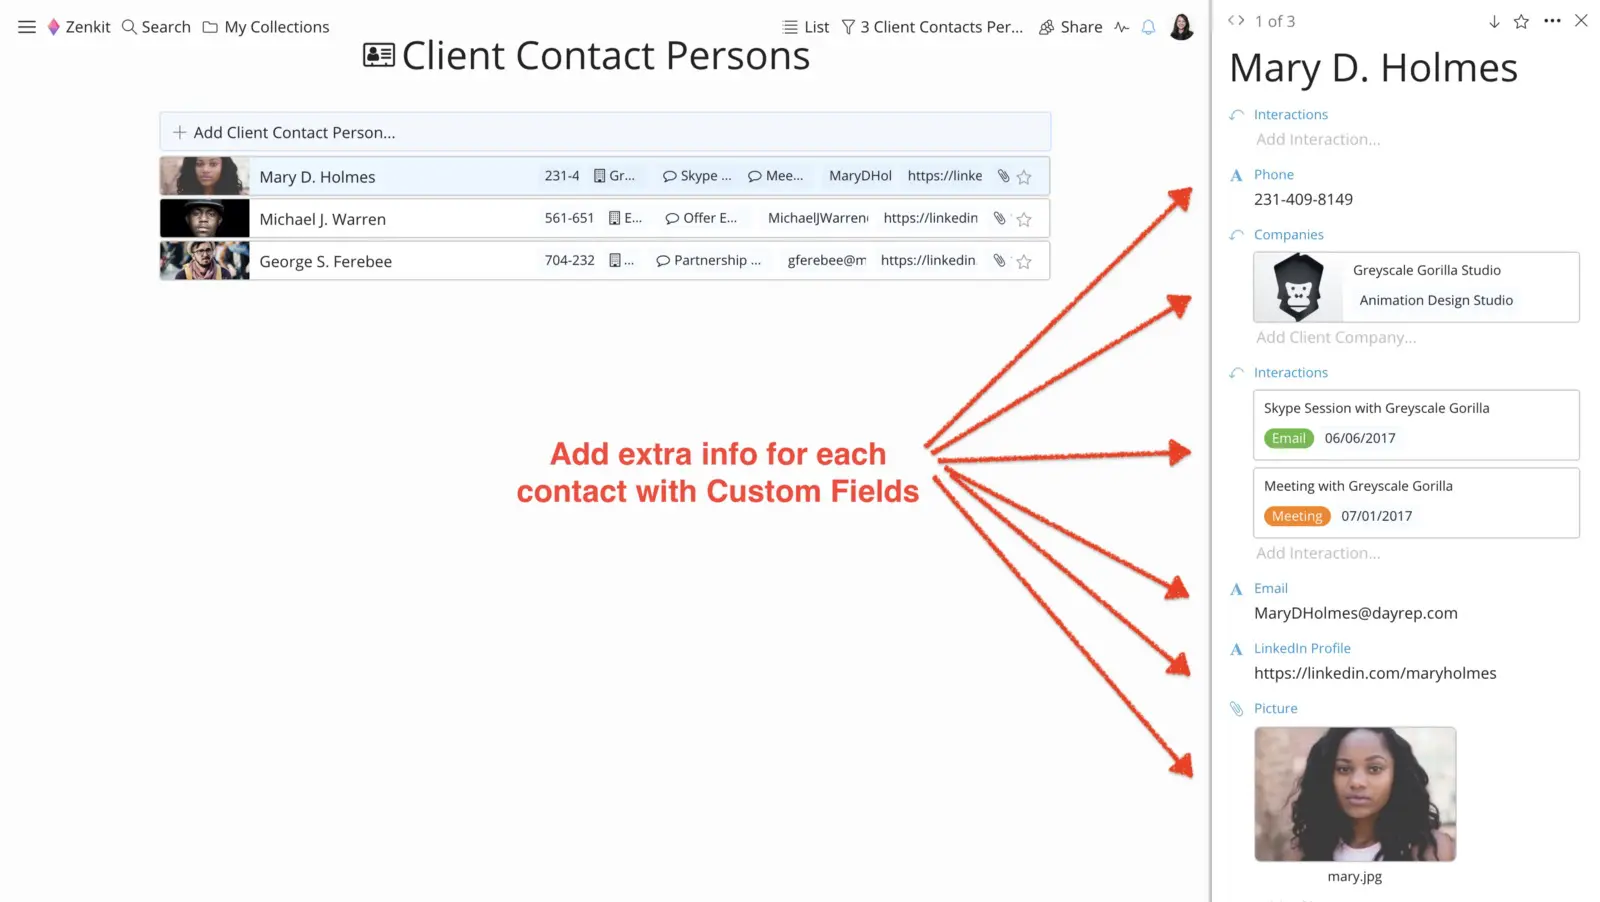 Client Contact Persons template in Zenkit CRM